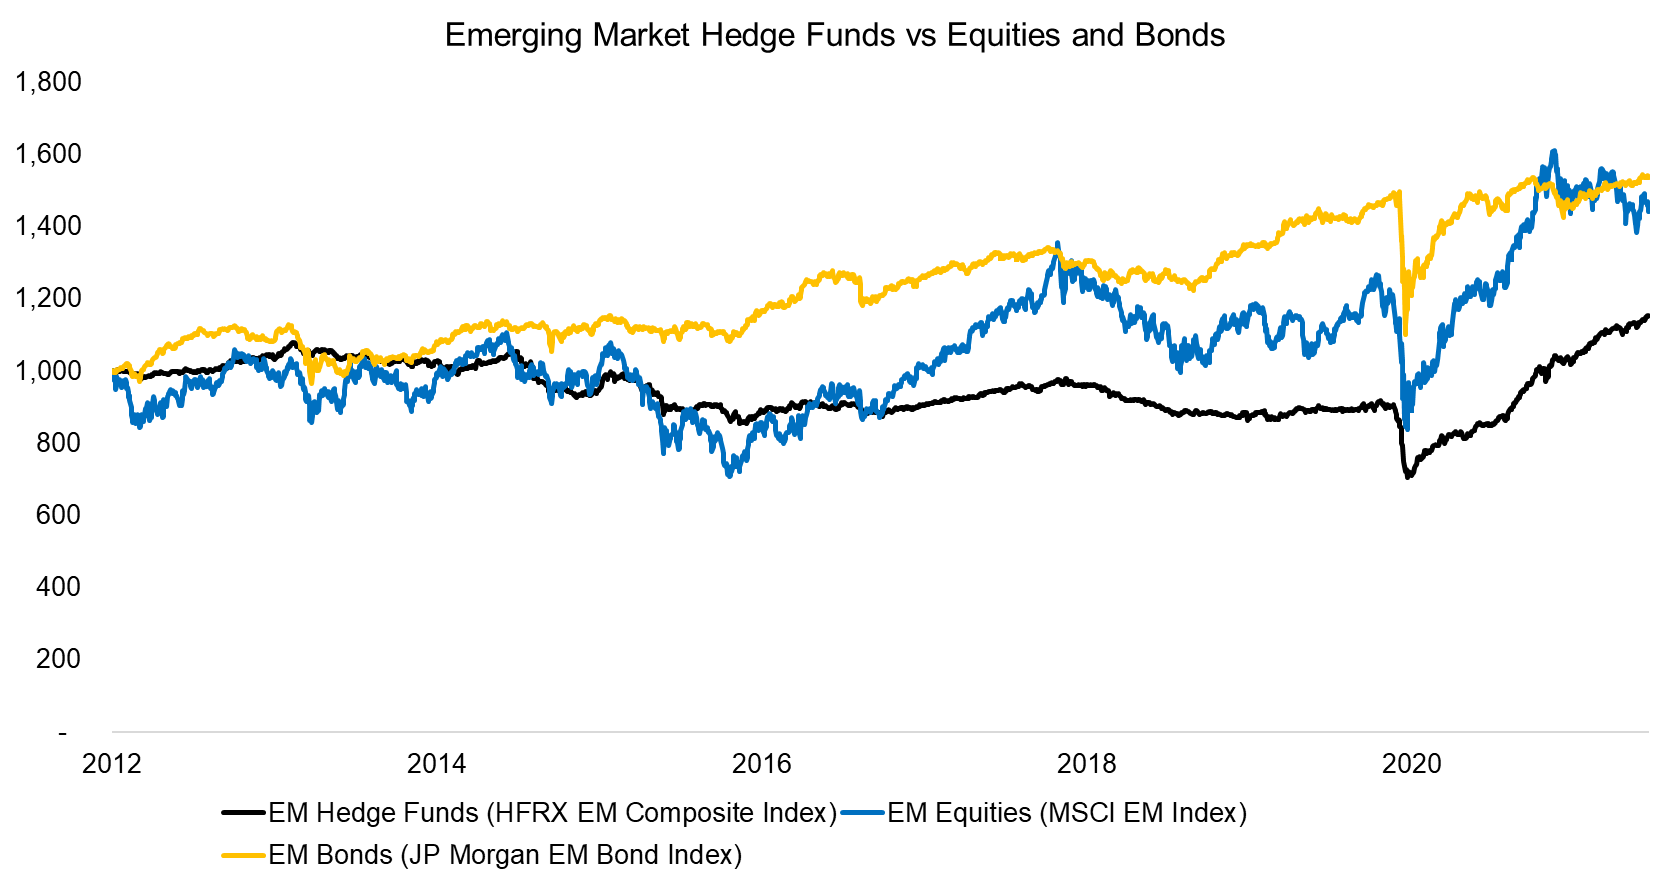 Emerging Market Hedge Funds vs Equities and Bonds